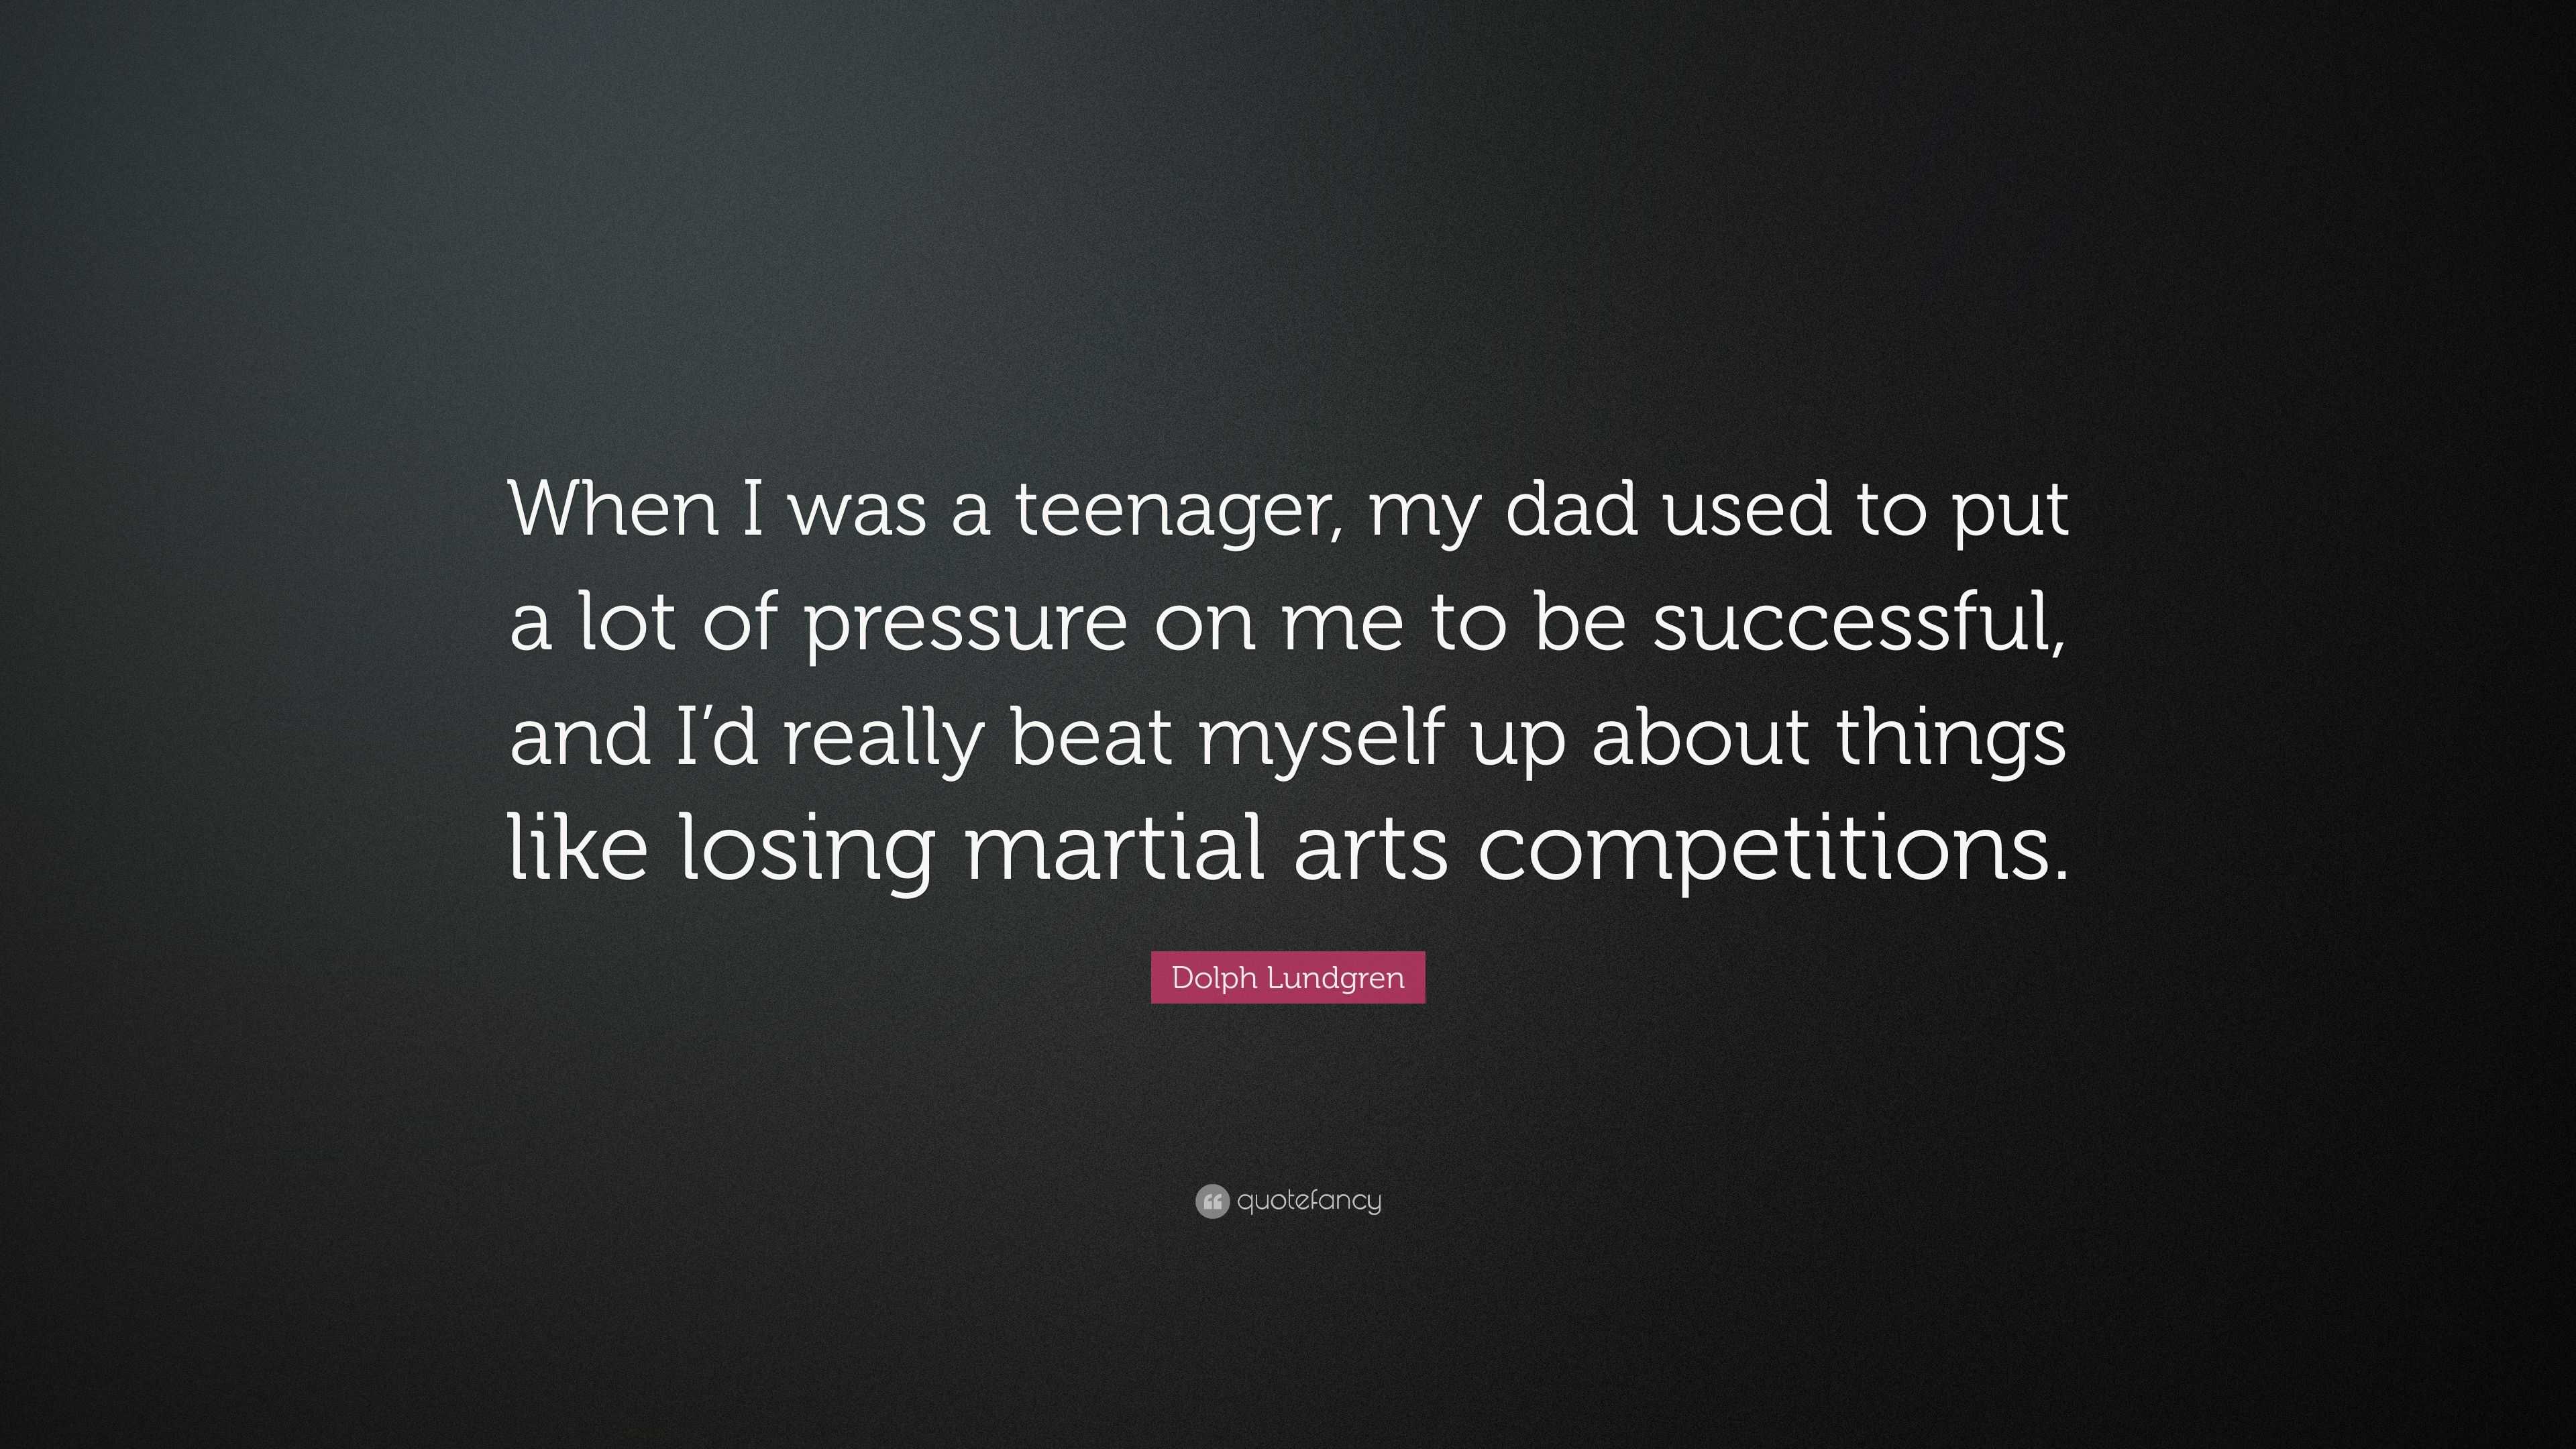 Dolph Lundgren Quote: “When I was a teenager, my dad used to put a lot of  pressure on me to be successful, and I'd really beat myself up about ”